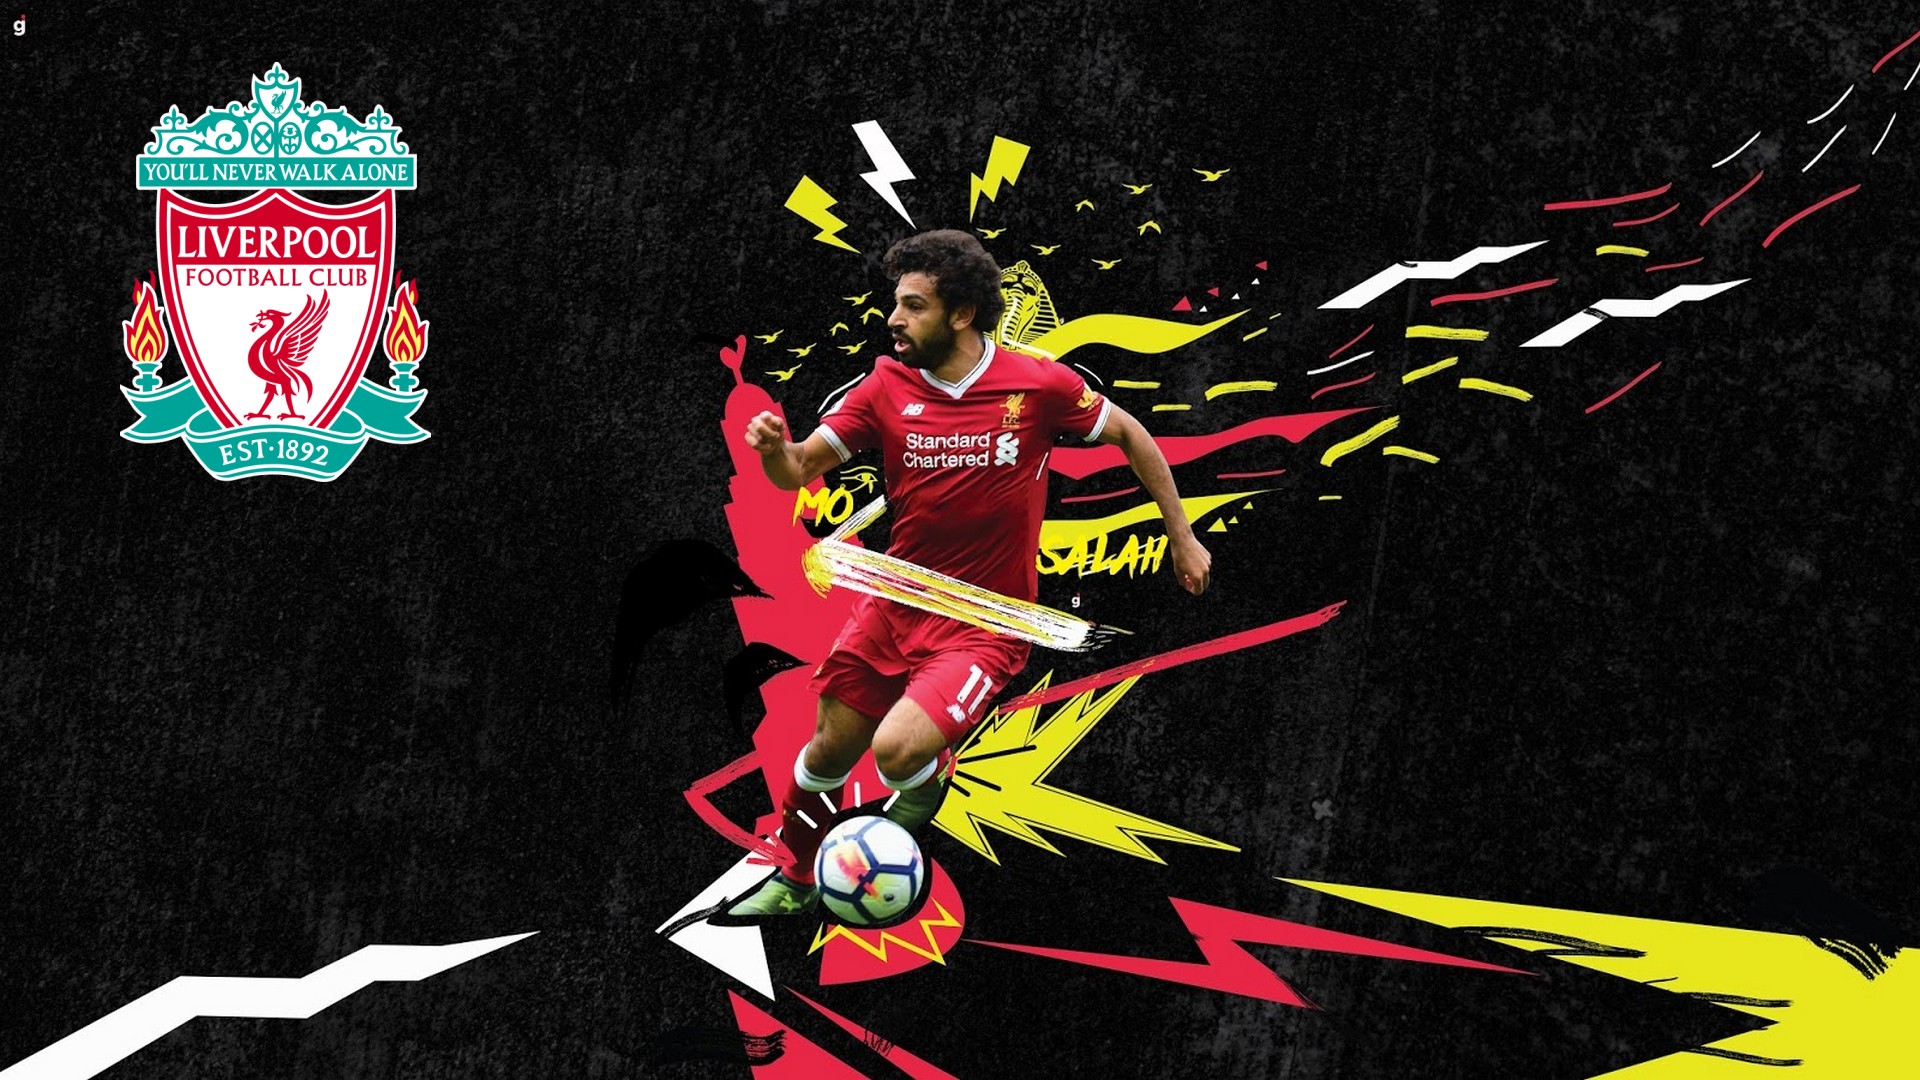 Liverpool Mohamed Salah Desktop Wallpaper with image resolution 1920x1080 pixel. You can use this wallpaper as background for your desktop Computer Screensavers, Android or iPhone smartphones